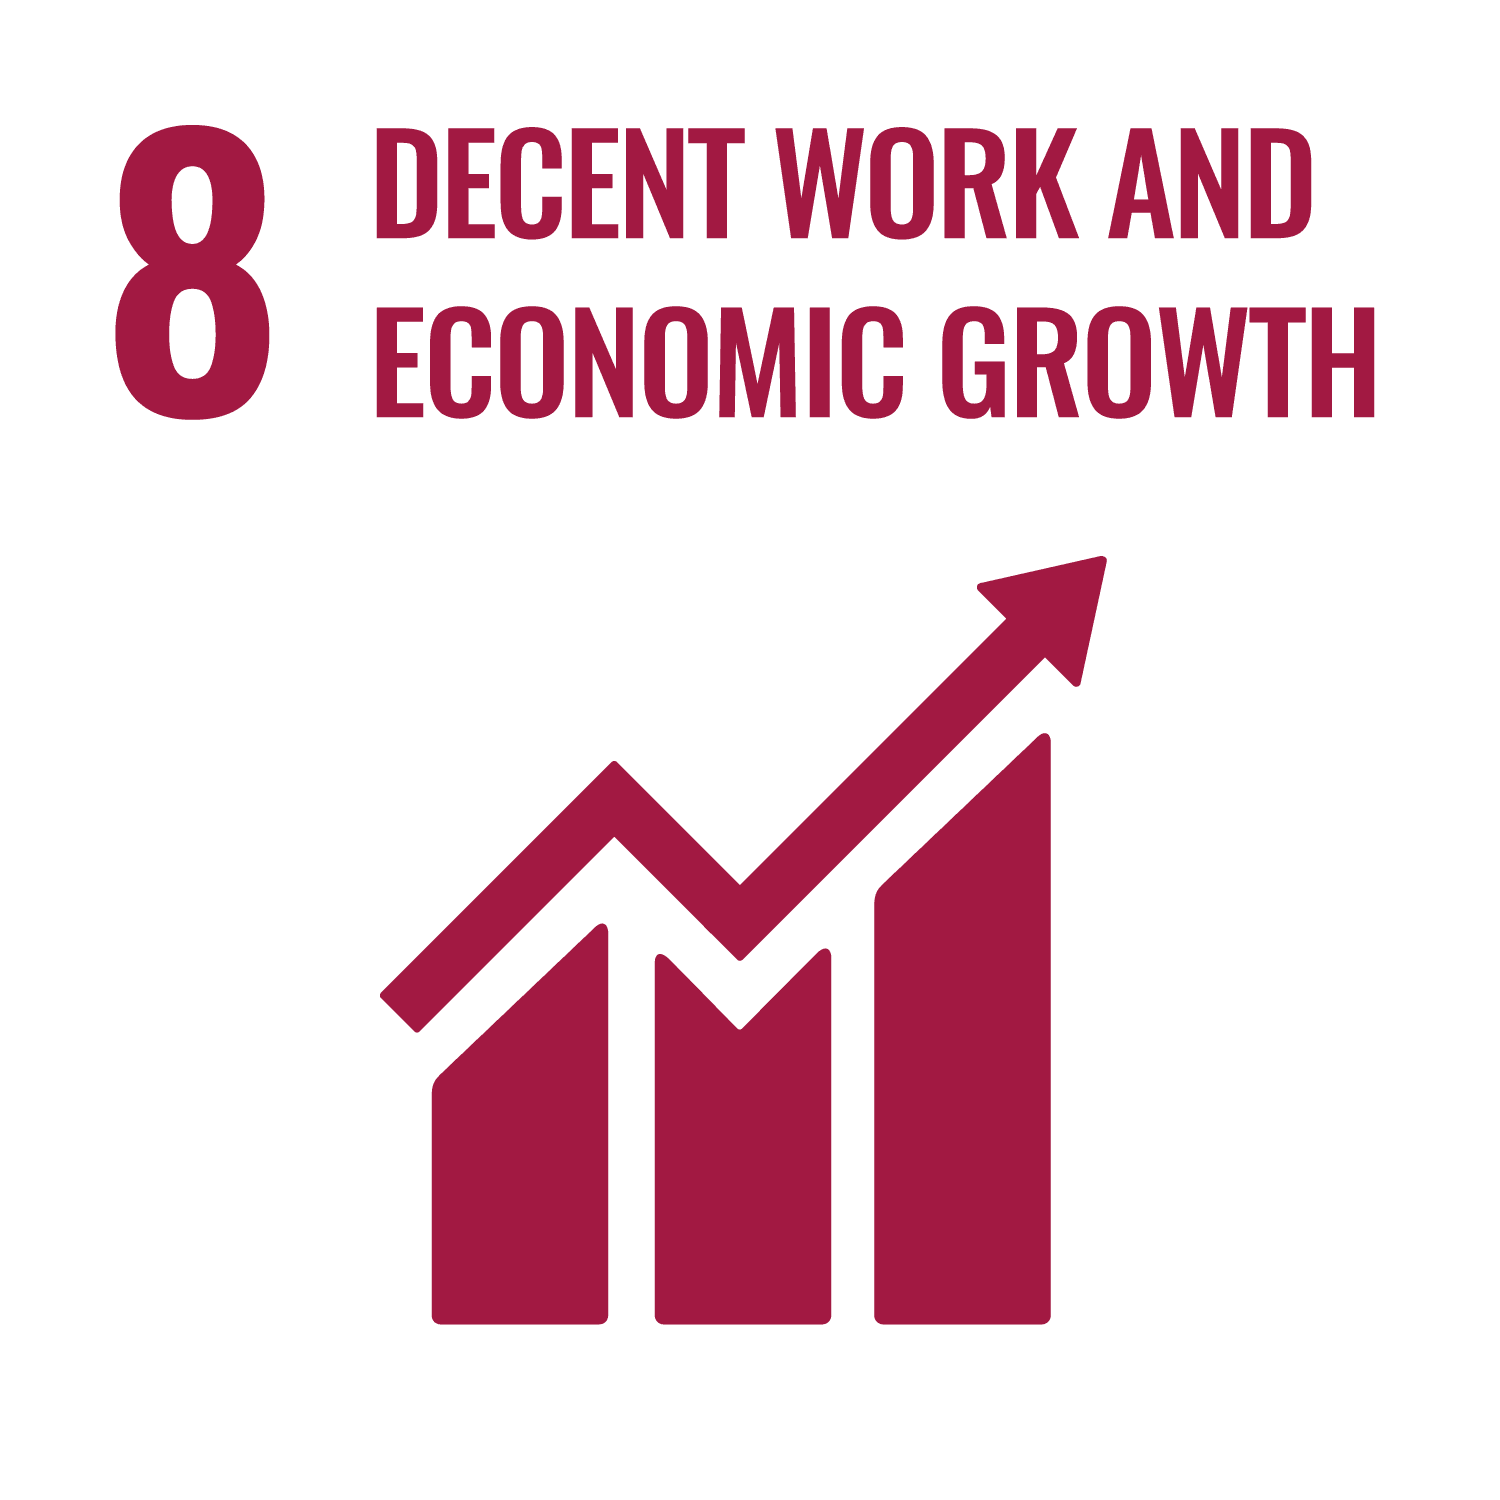 Goal 8, Decent work and economic growth